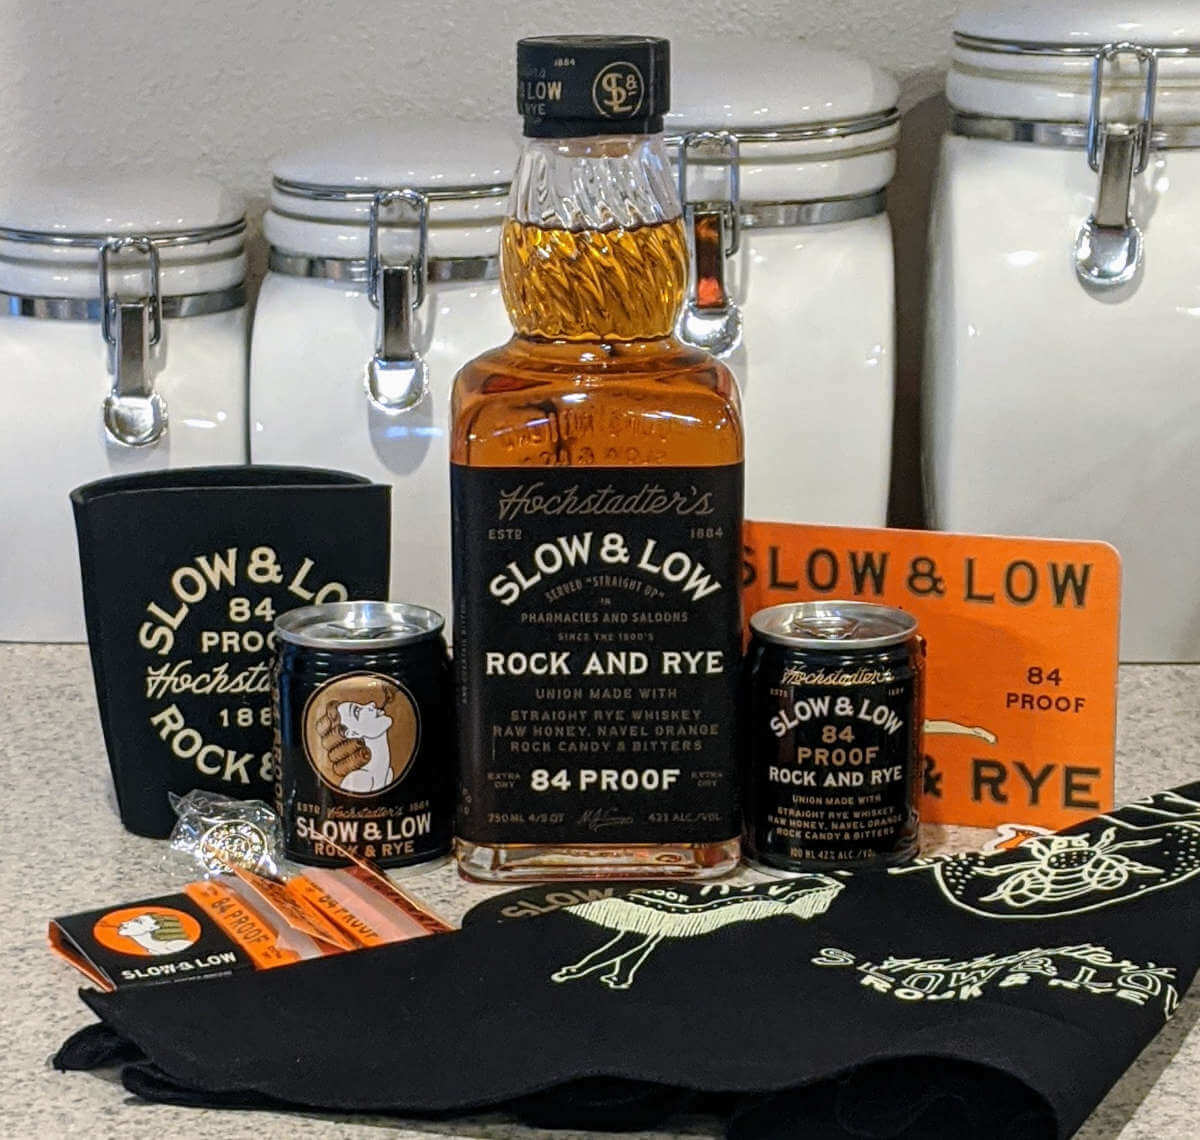 Received: Hochstadter’s Slow & Low Rock and Rye